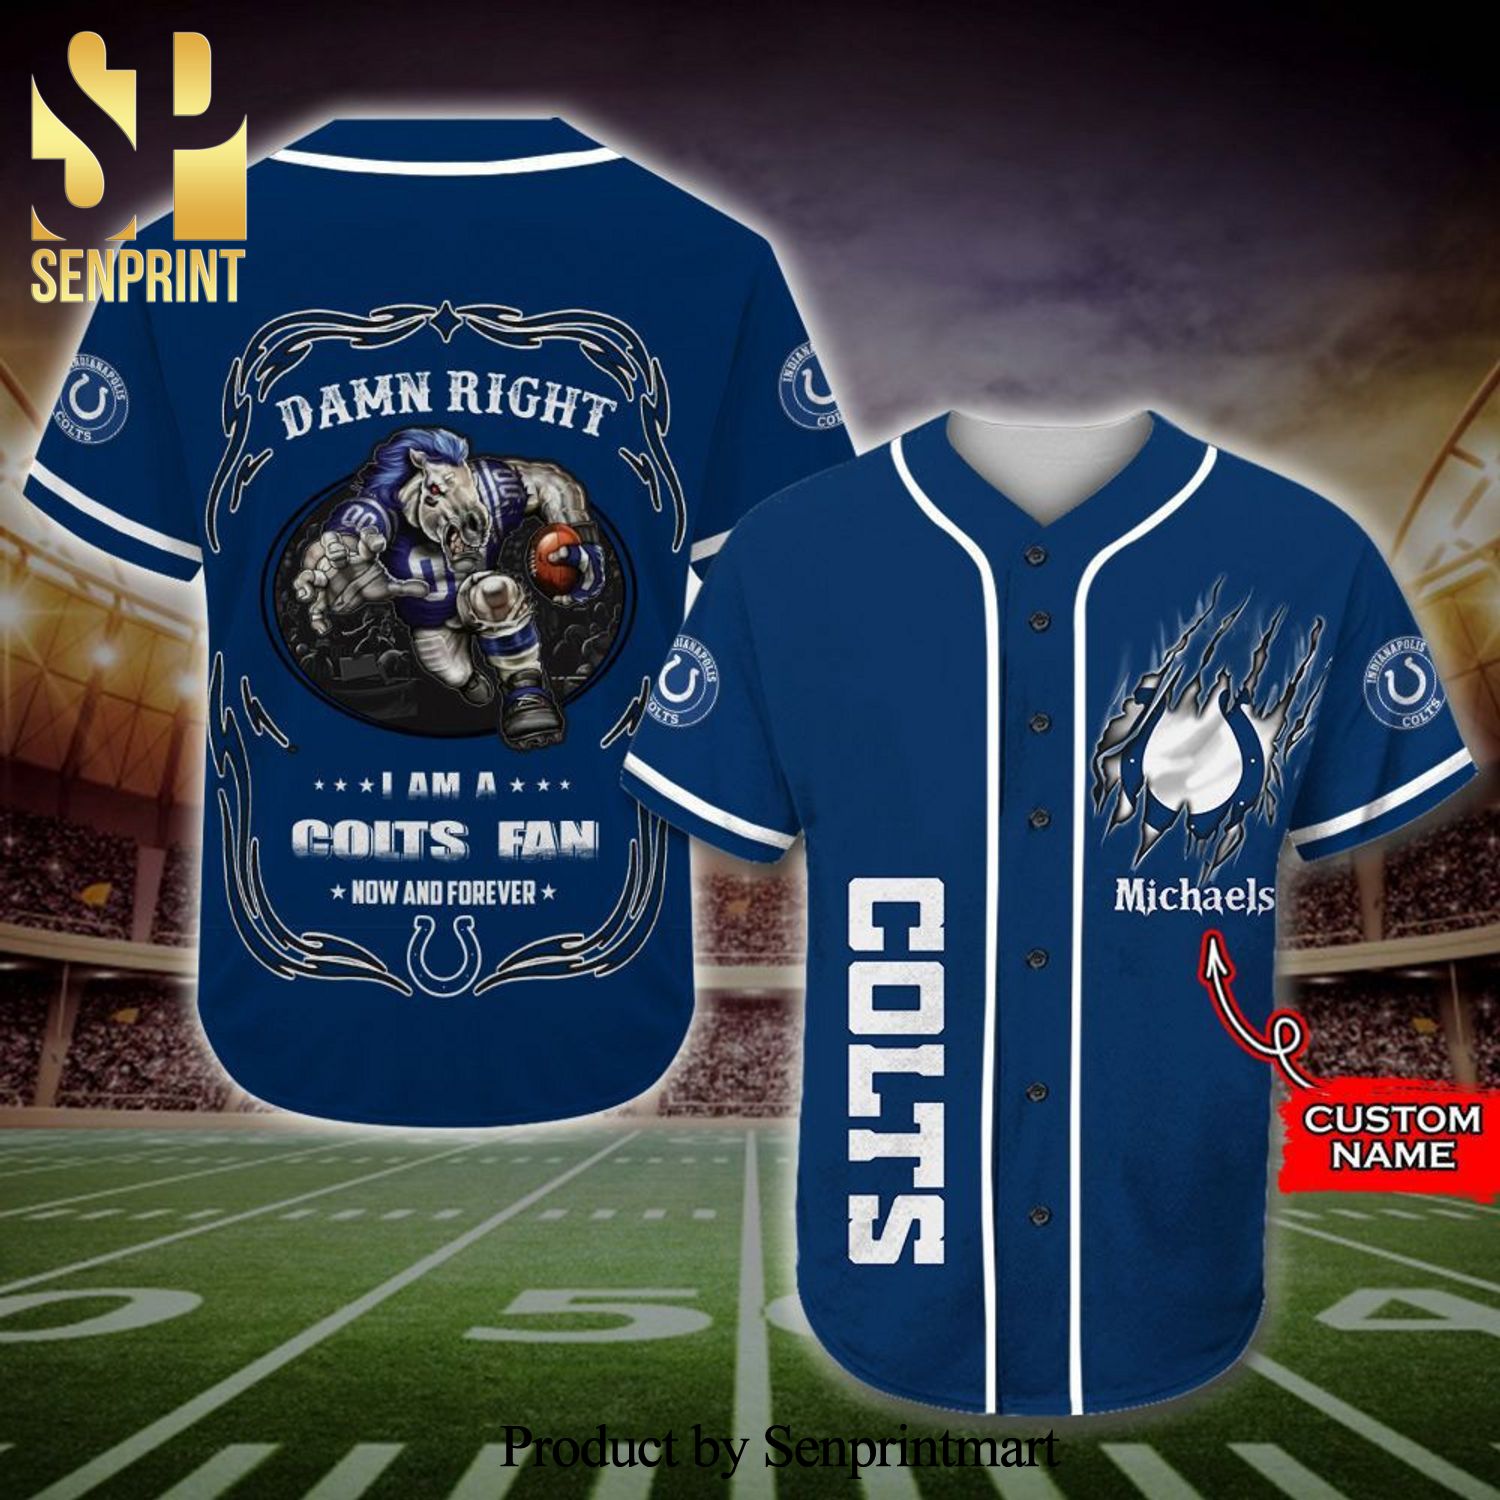 Personalized I Am A Indianapolis Colts Fan Mascot Full Printing Baseball Jersey – Navy